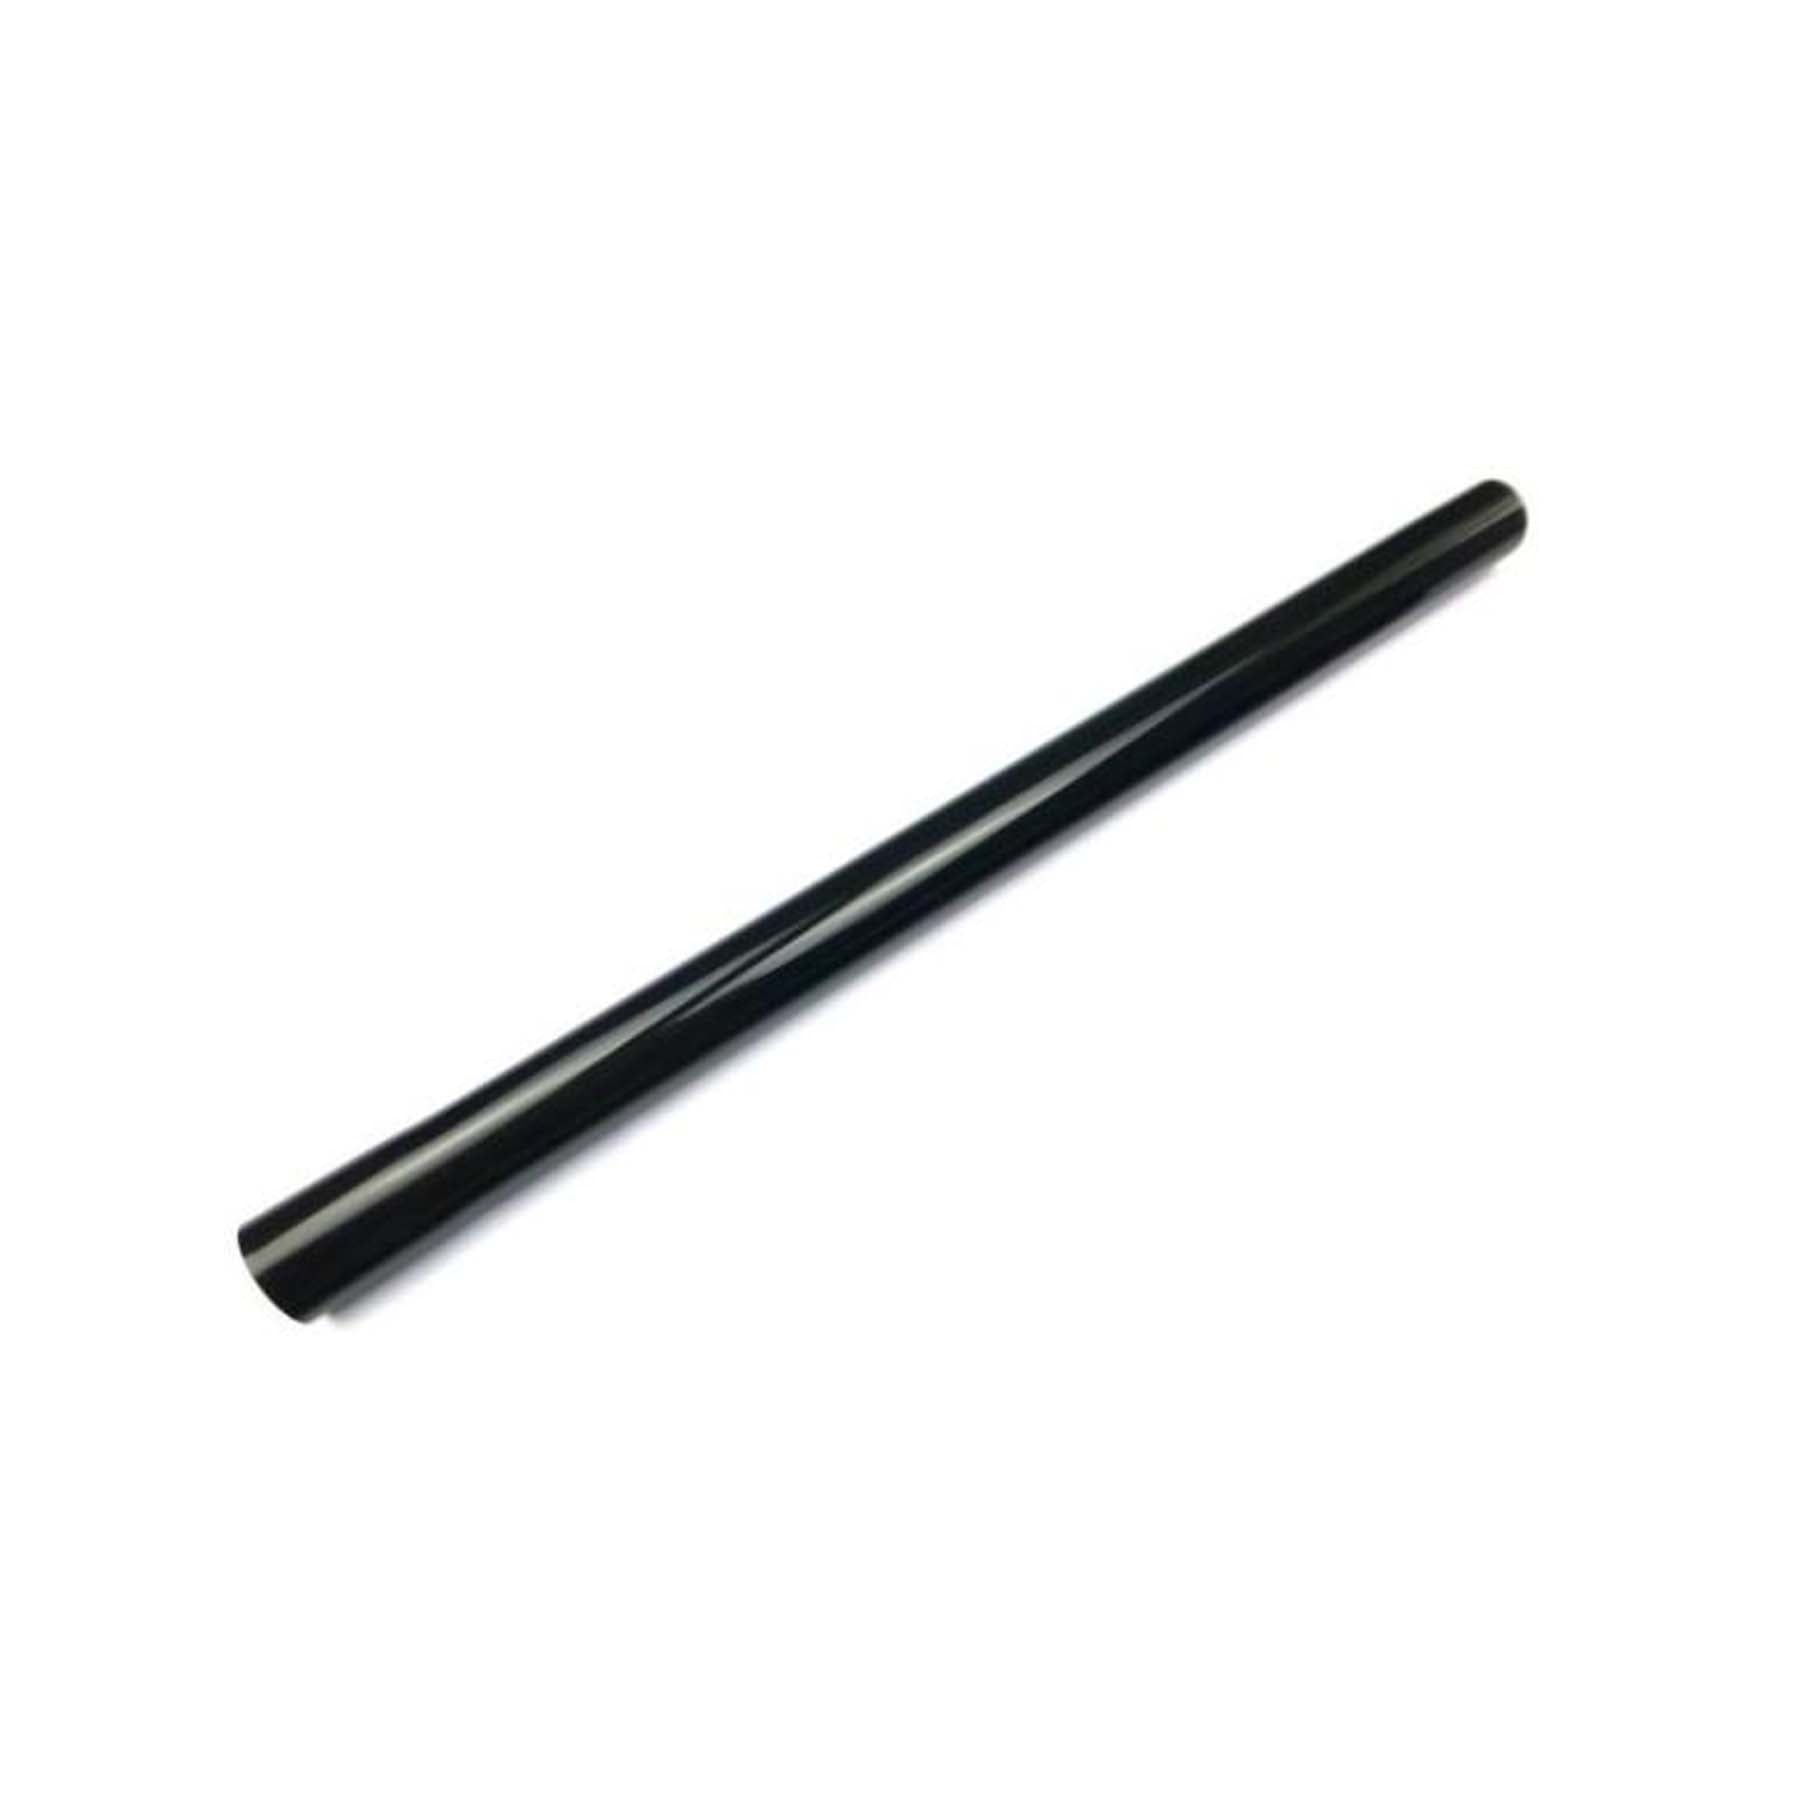 WAND 2 PIECE PLASTIC (SOLD SEPARATELY)